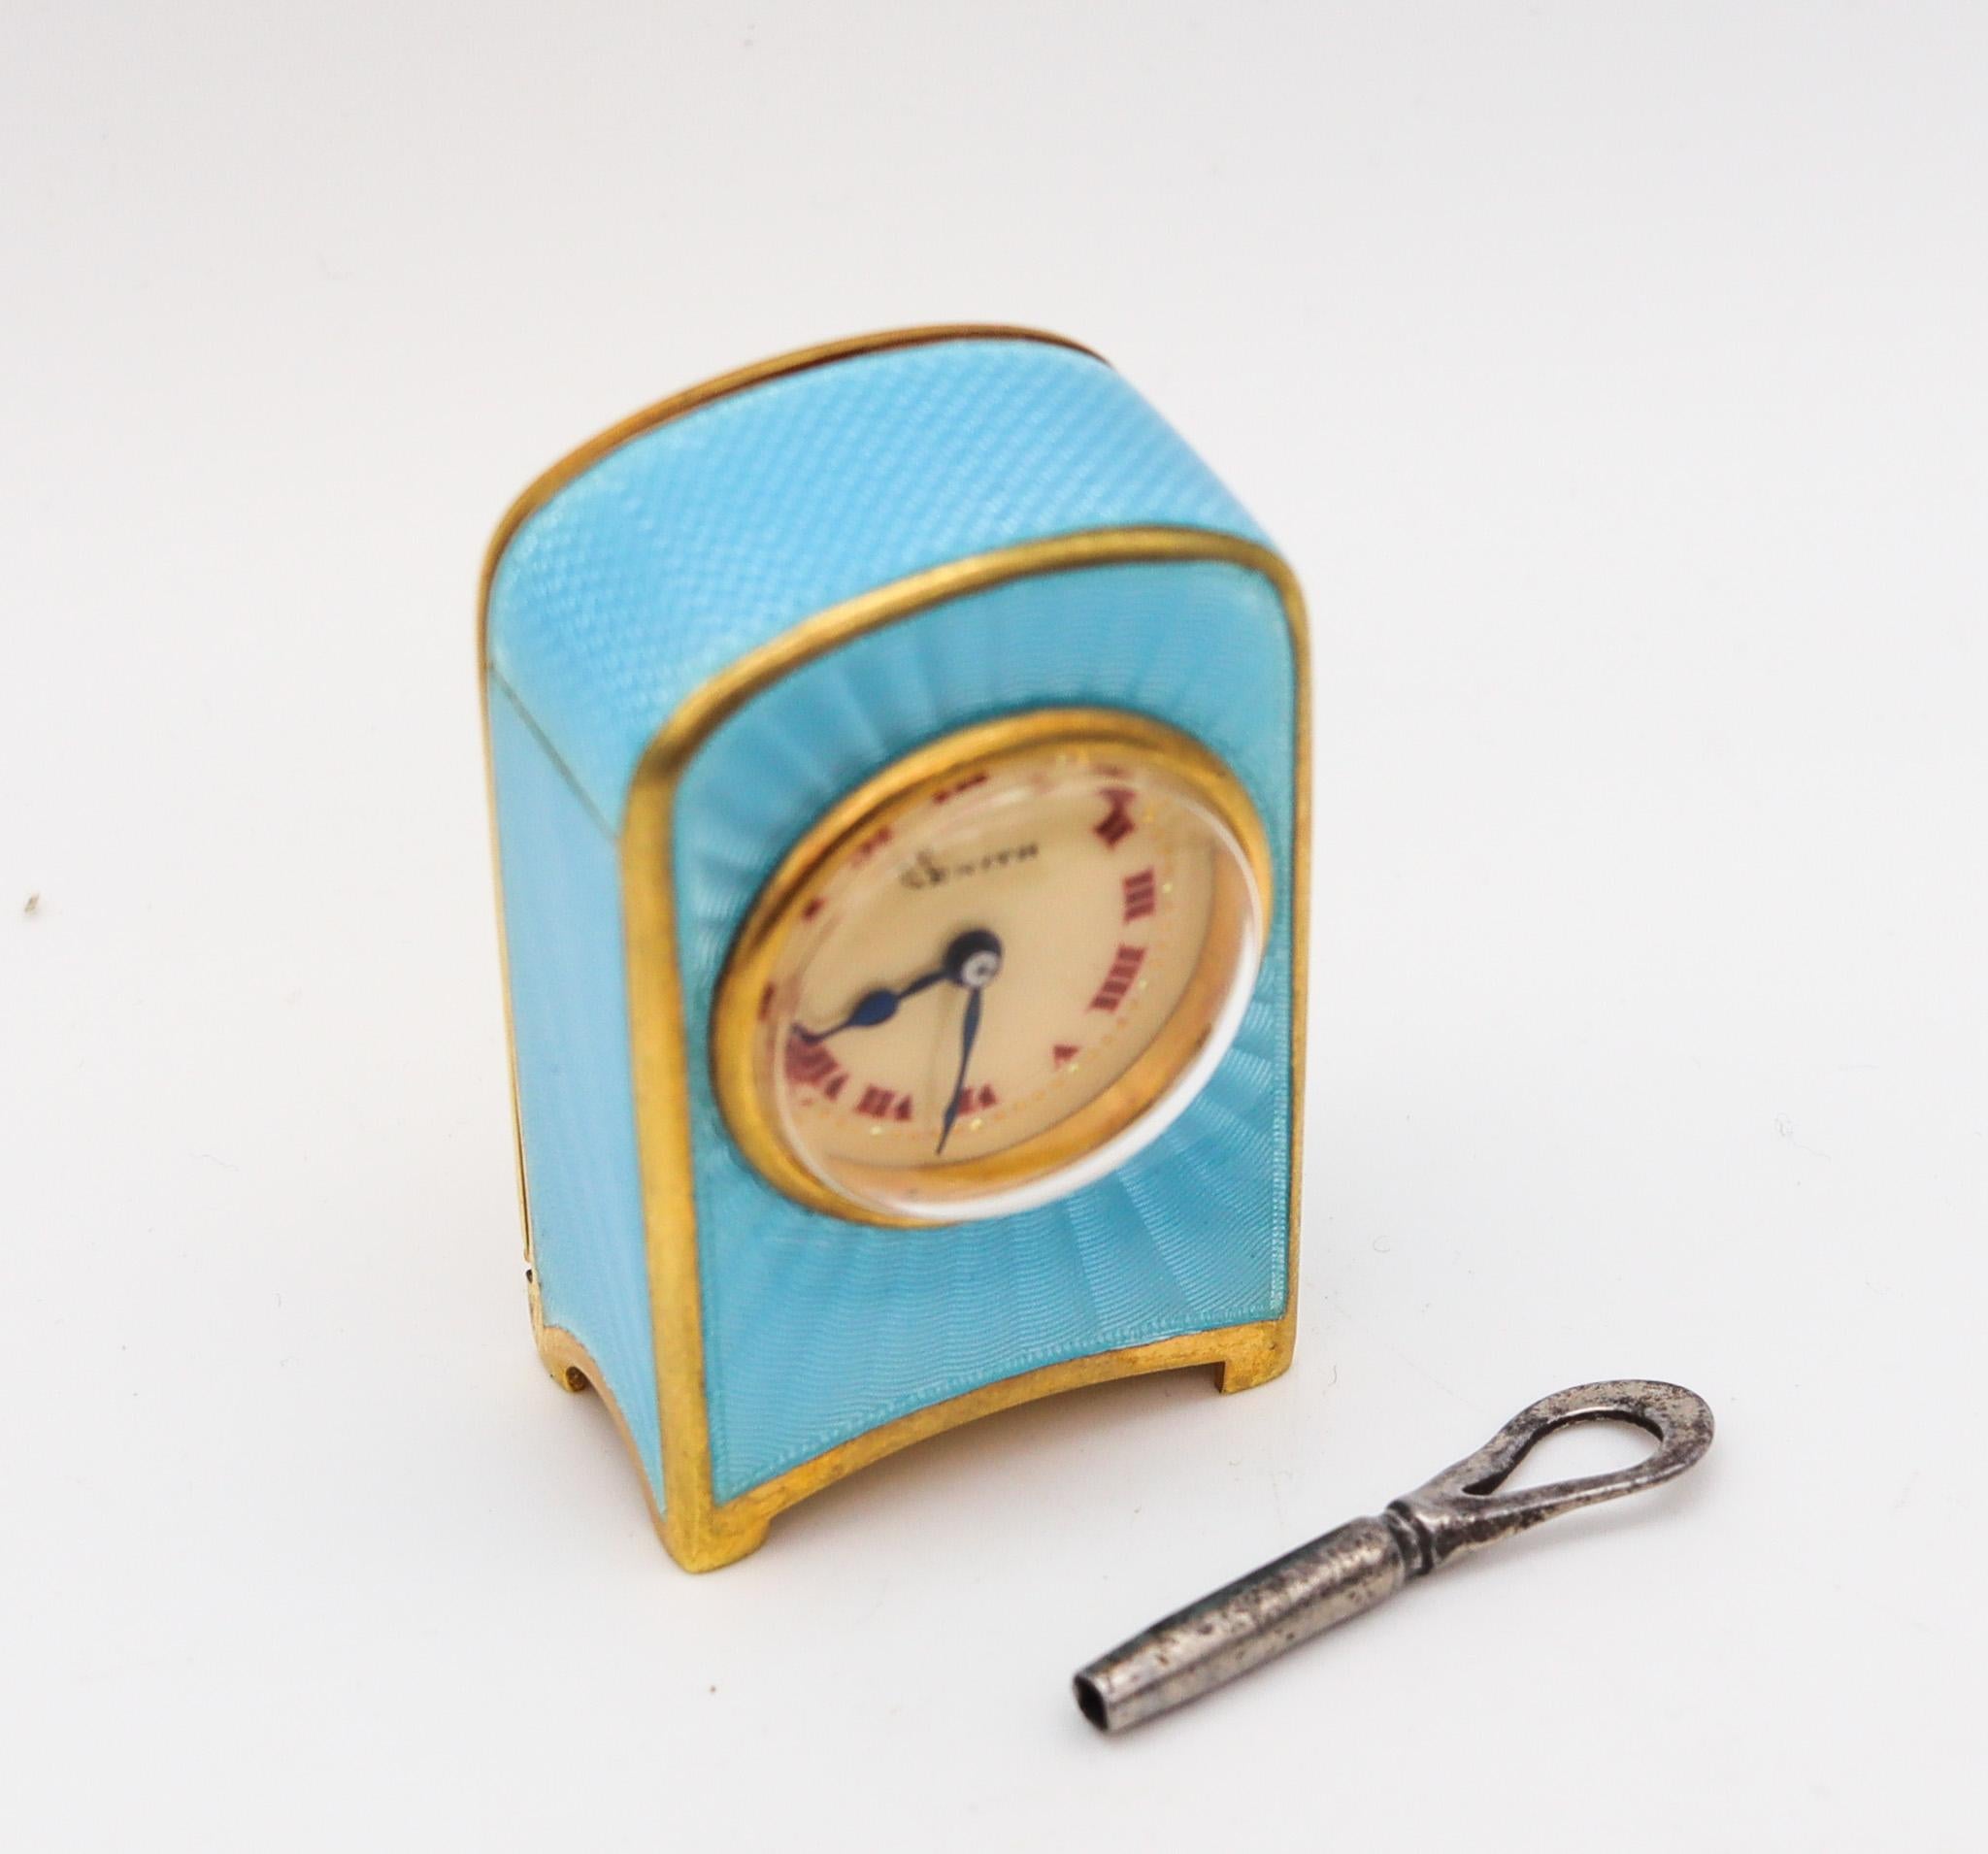 A miniature travel clock designed by Zenith.

Gorgeous miniature travel-carriage clock, made in Geneva Switzerland by Zenith. This little antique clock is exceptional, created during the Edwardian period, back in the 1910. It was crafted with